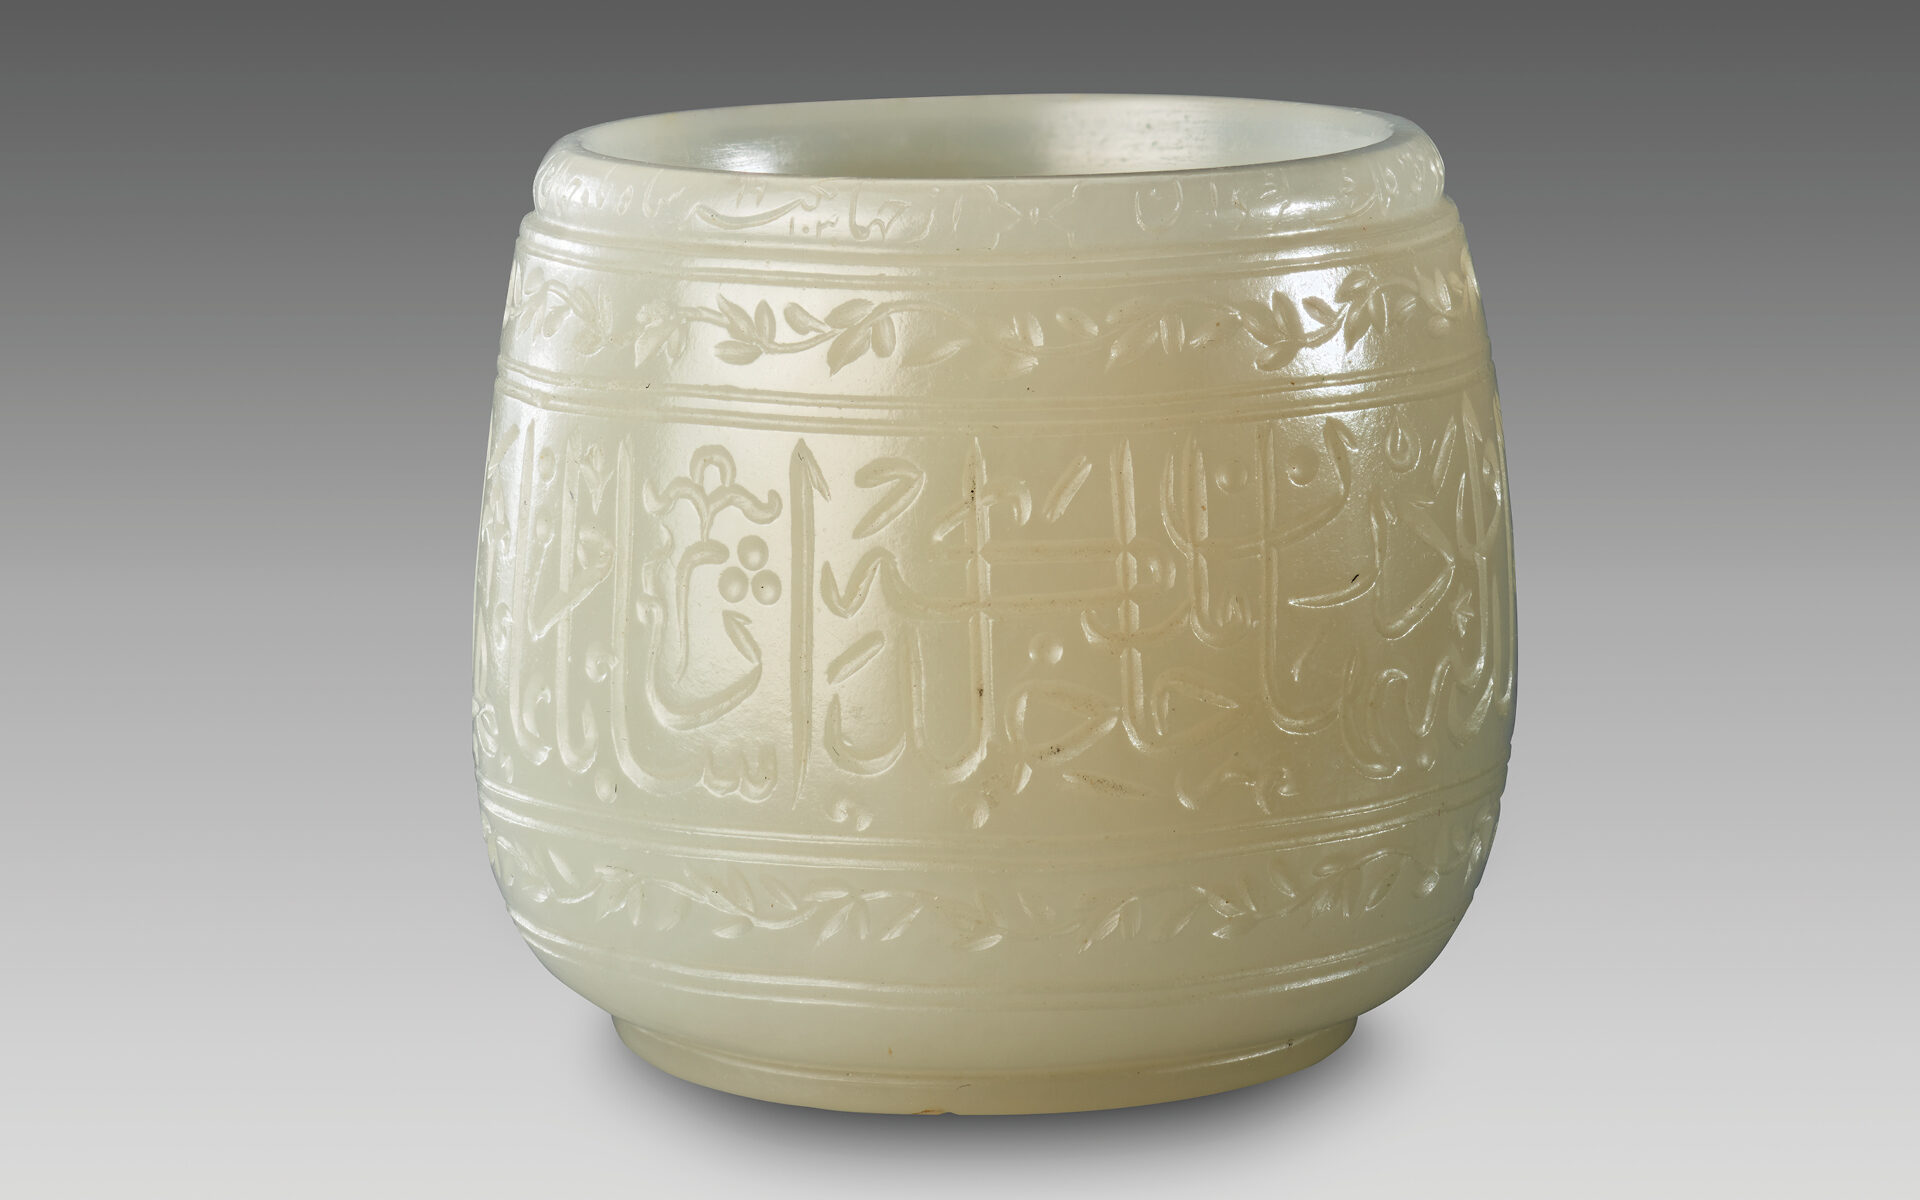 A small, shiny, cream-colored jade cup with Arabic script and flowers carved on the surface.